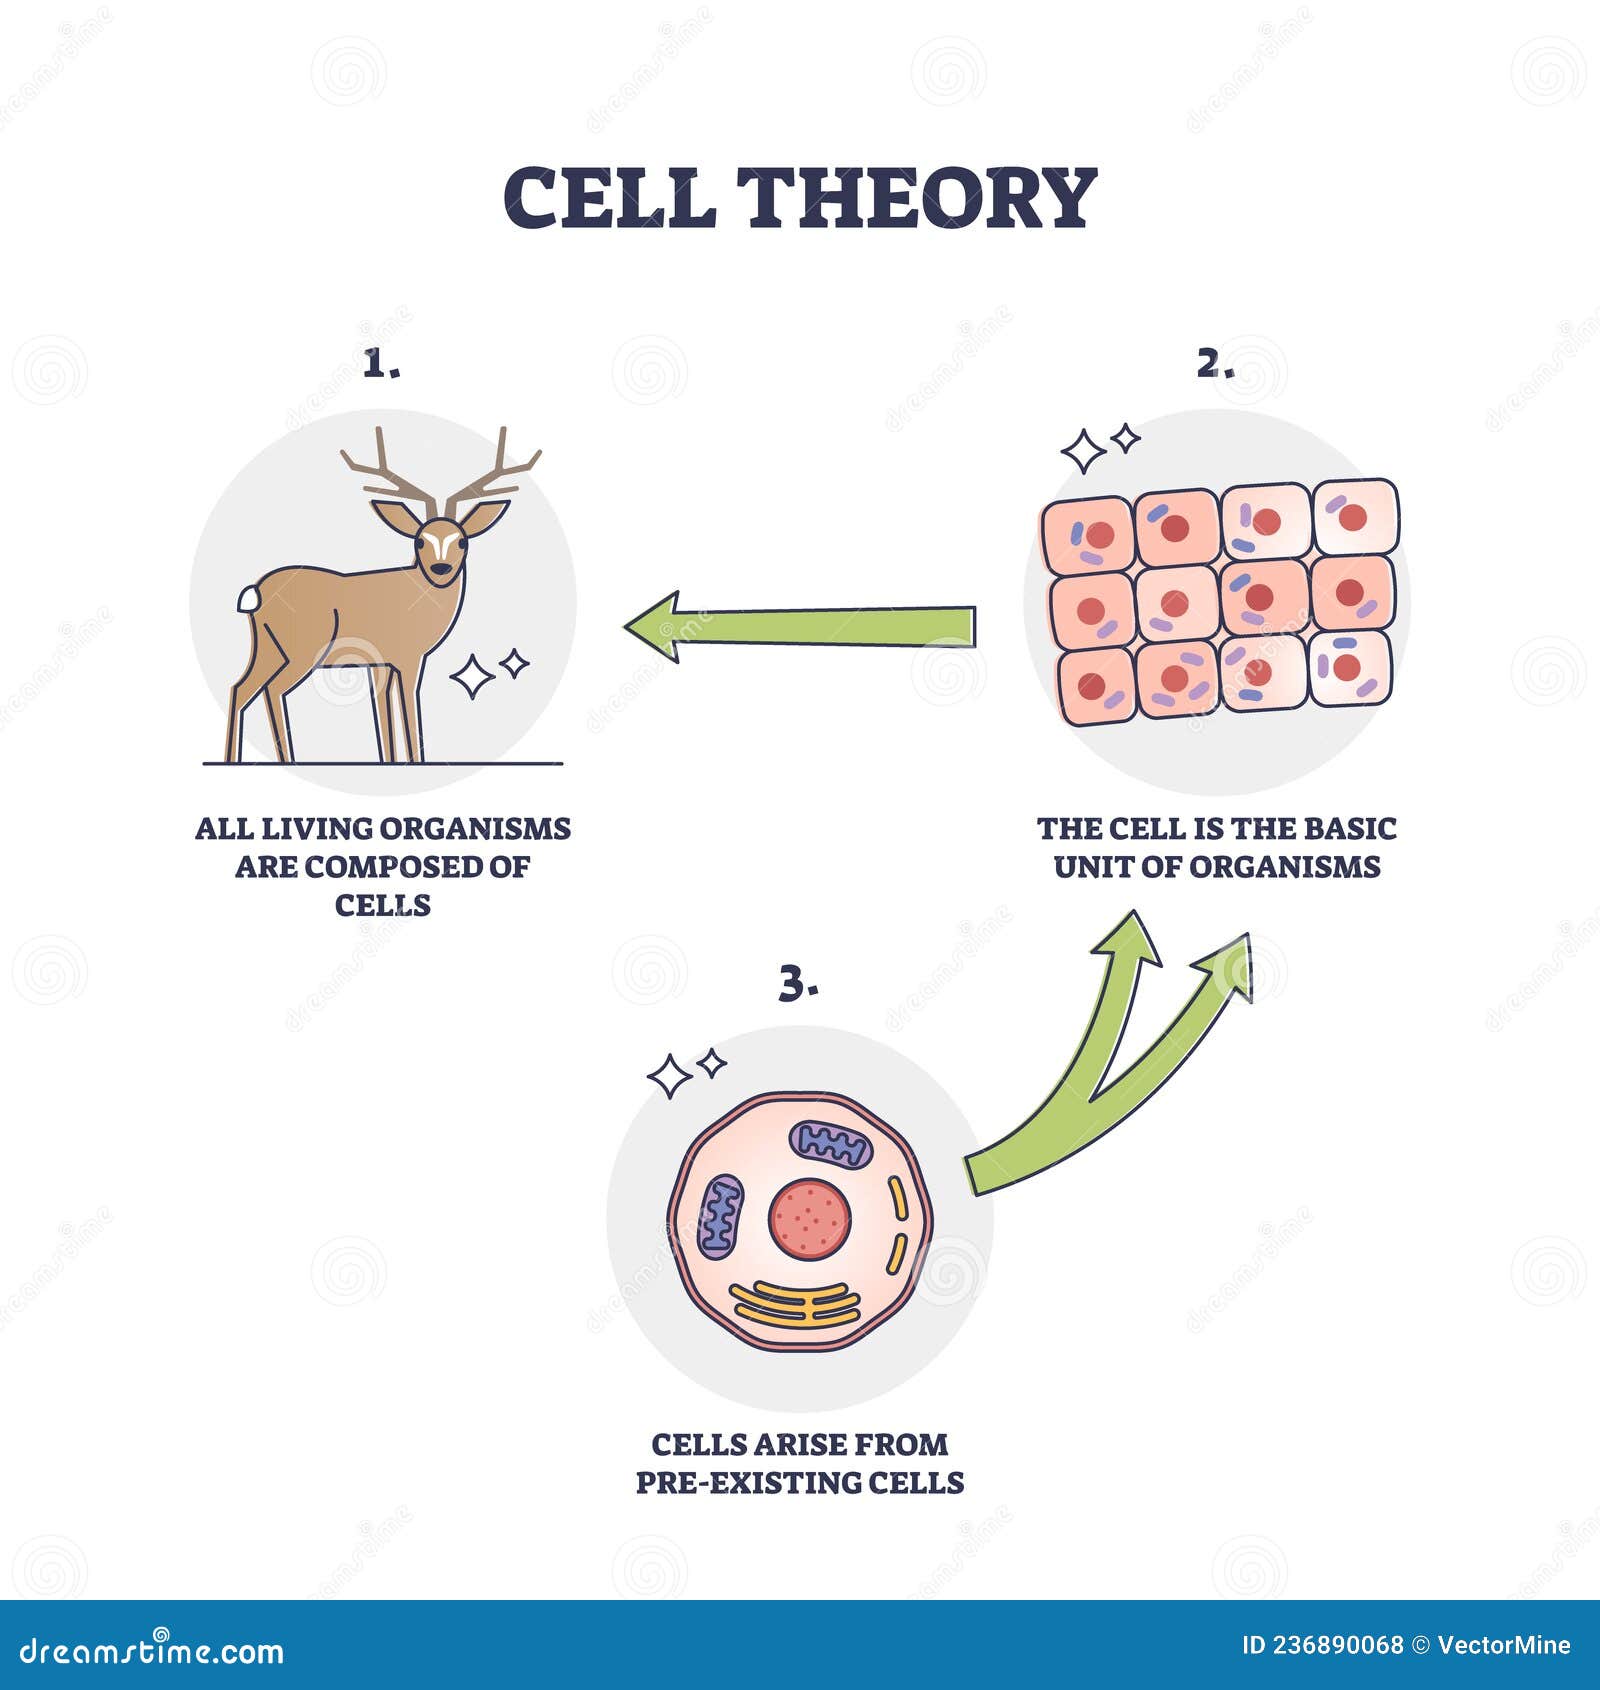 cell theory for evolution and pre existing cells development outline diagram